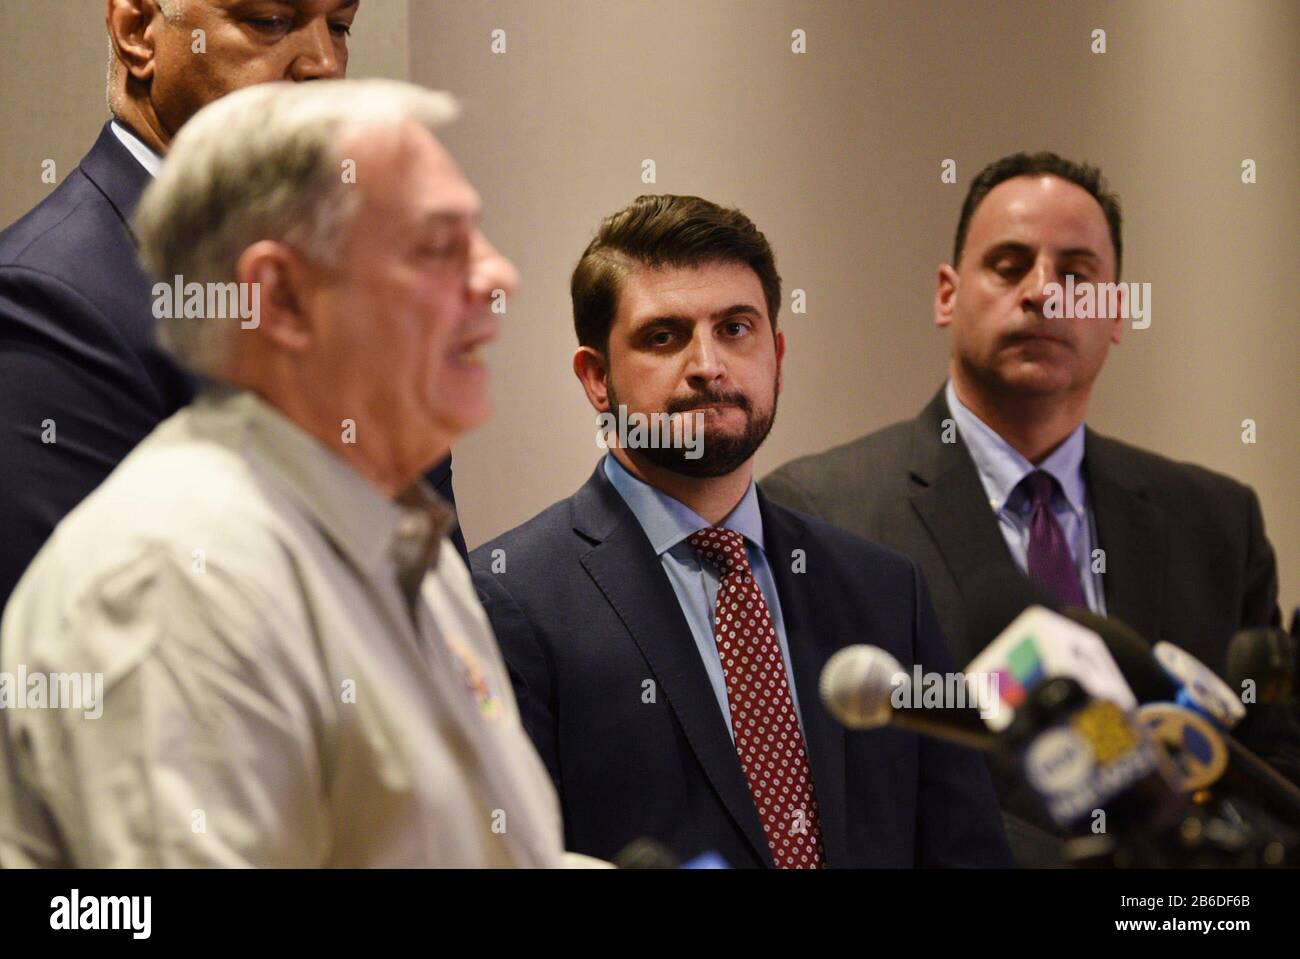 Hackensack, USA. 10th Mar, 2020. Mayor of Little Ferry Mauro Raguseo listens as Bergen County Executive Jim Tedesco speaks on the recent developments in connection with COVID-19 during a news conference at Two Bergen County Plaza in Hackensack on 03/30/20. Tedesco Presser (Photo by Mitsu Yasukawa/ Northjersey.com/Imagn/USA Today Network/Sipa USA) Credit: Sipa USA/Alamy Live News Stock Photo